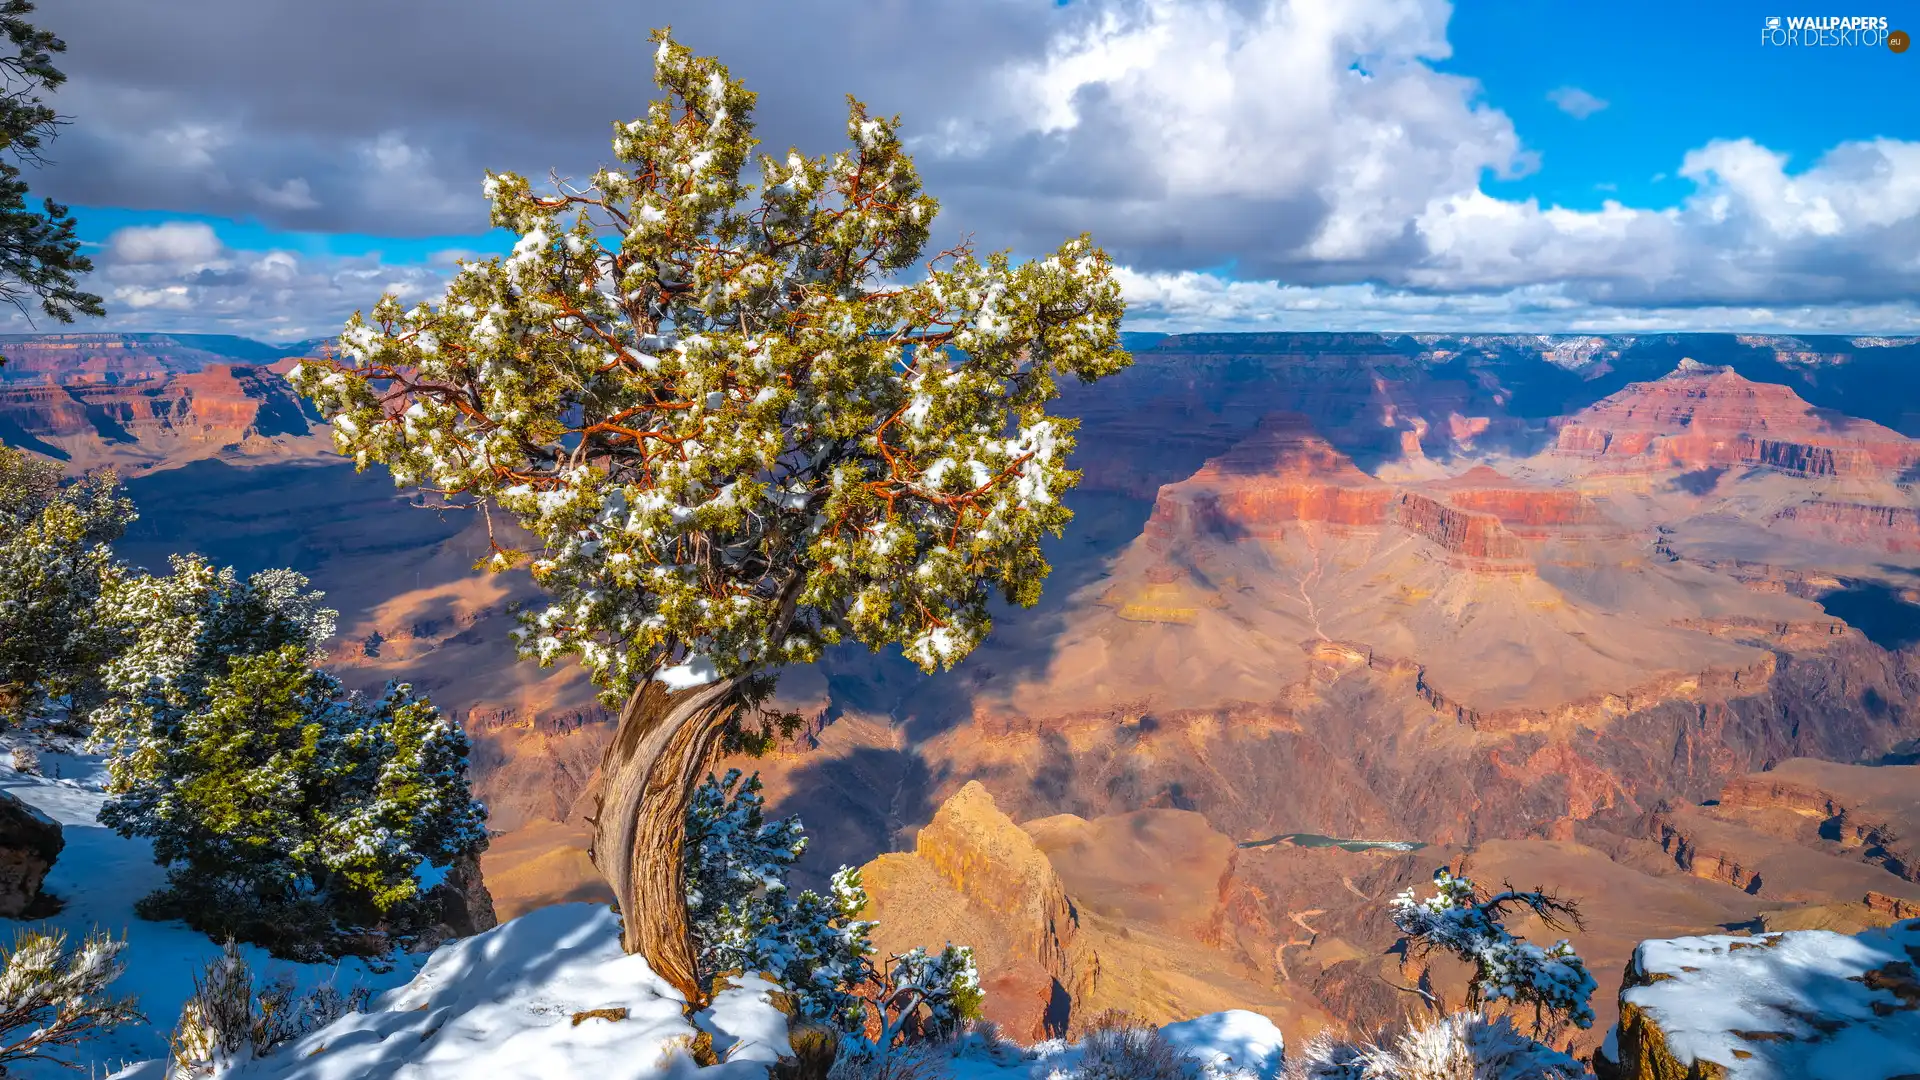 Grand Canyon, Grand Canyon National Park, Grand Canyon, Mountains, State of Arizona, The United States, trees, pine, Rocks